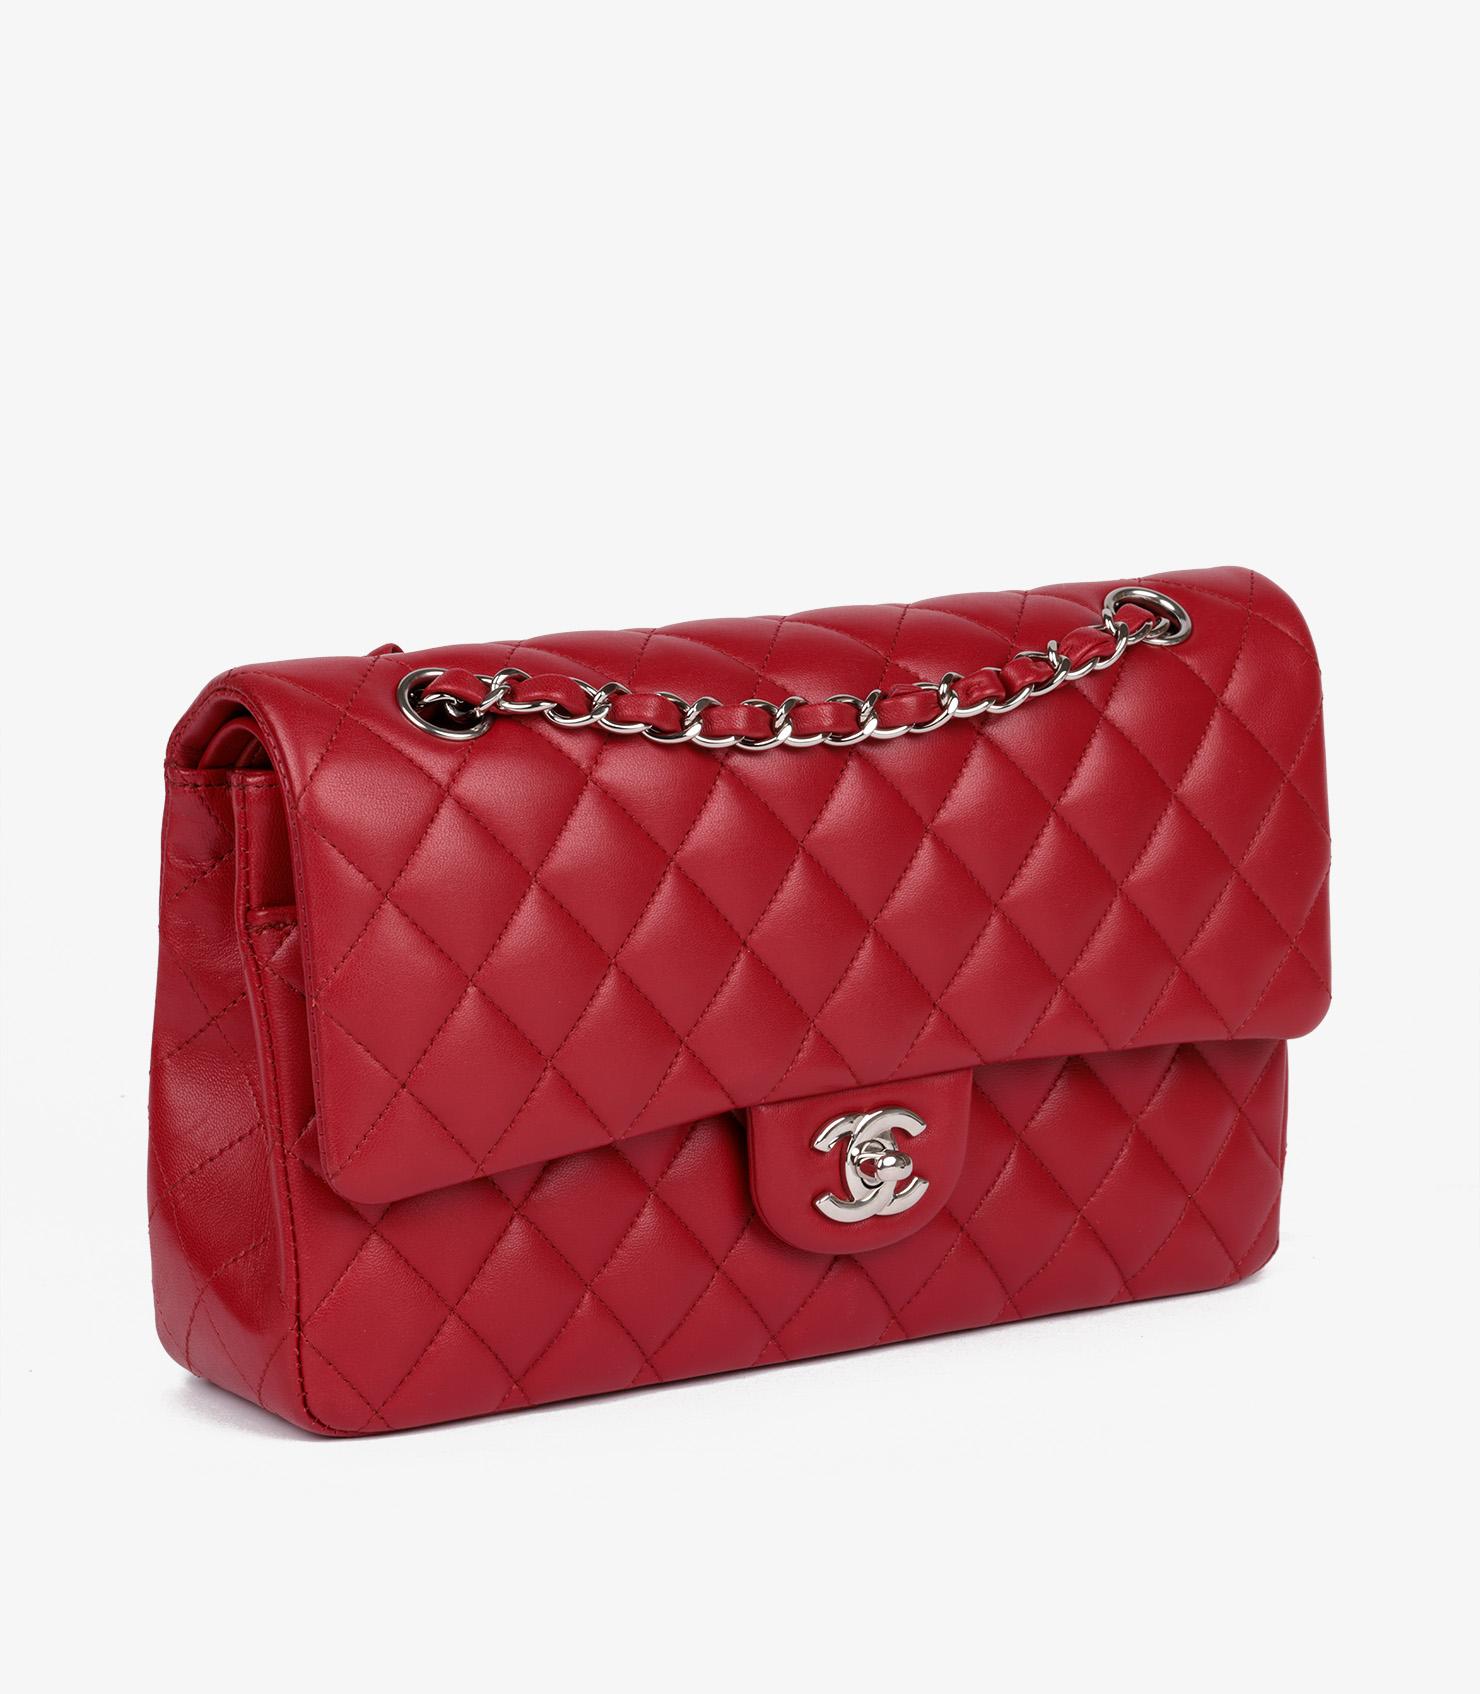 Chanel Red Quilted Lambskin Medium Classic Double Flap Bag In Excellent Condition For Sale In Bishop's Stortford, Hertfordshire